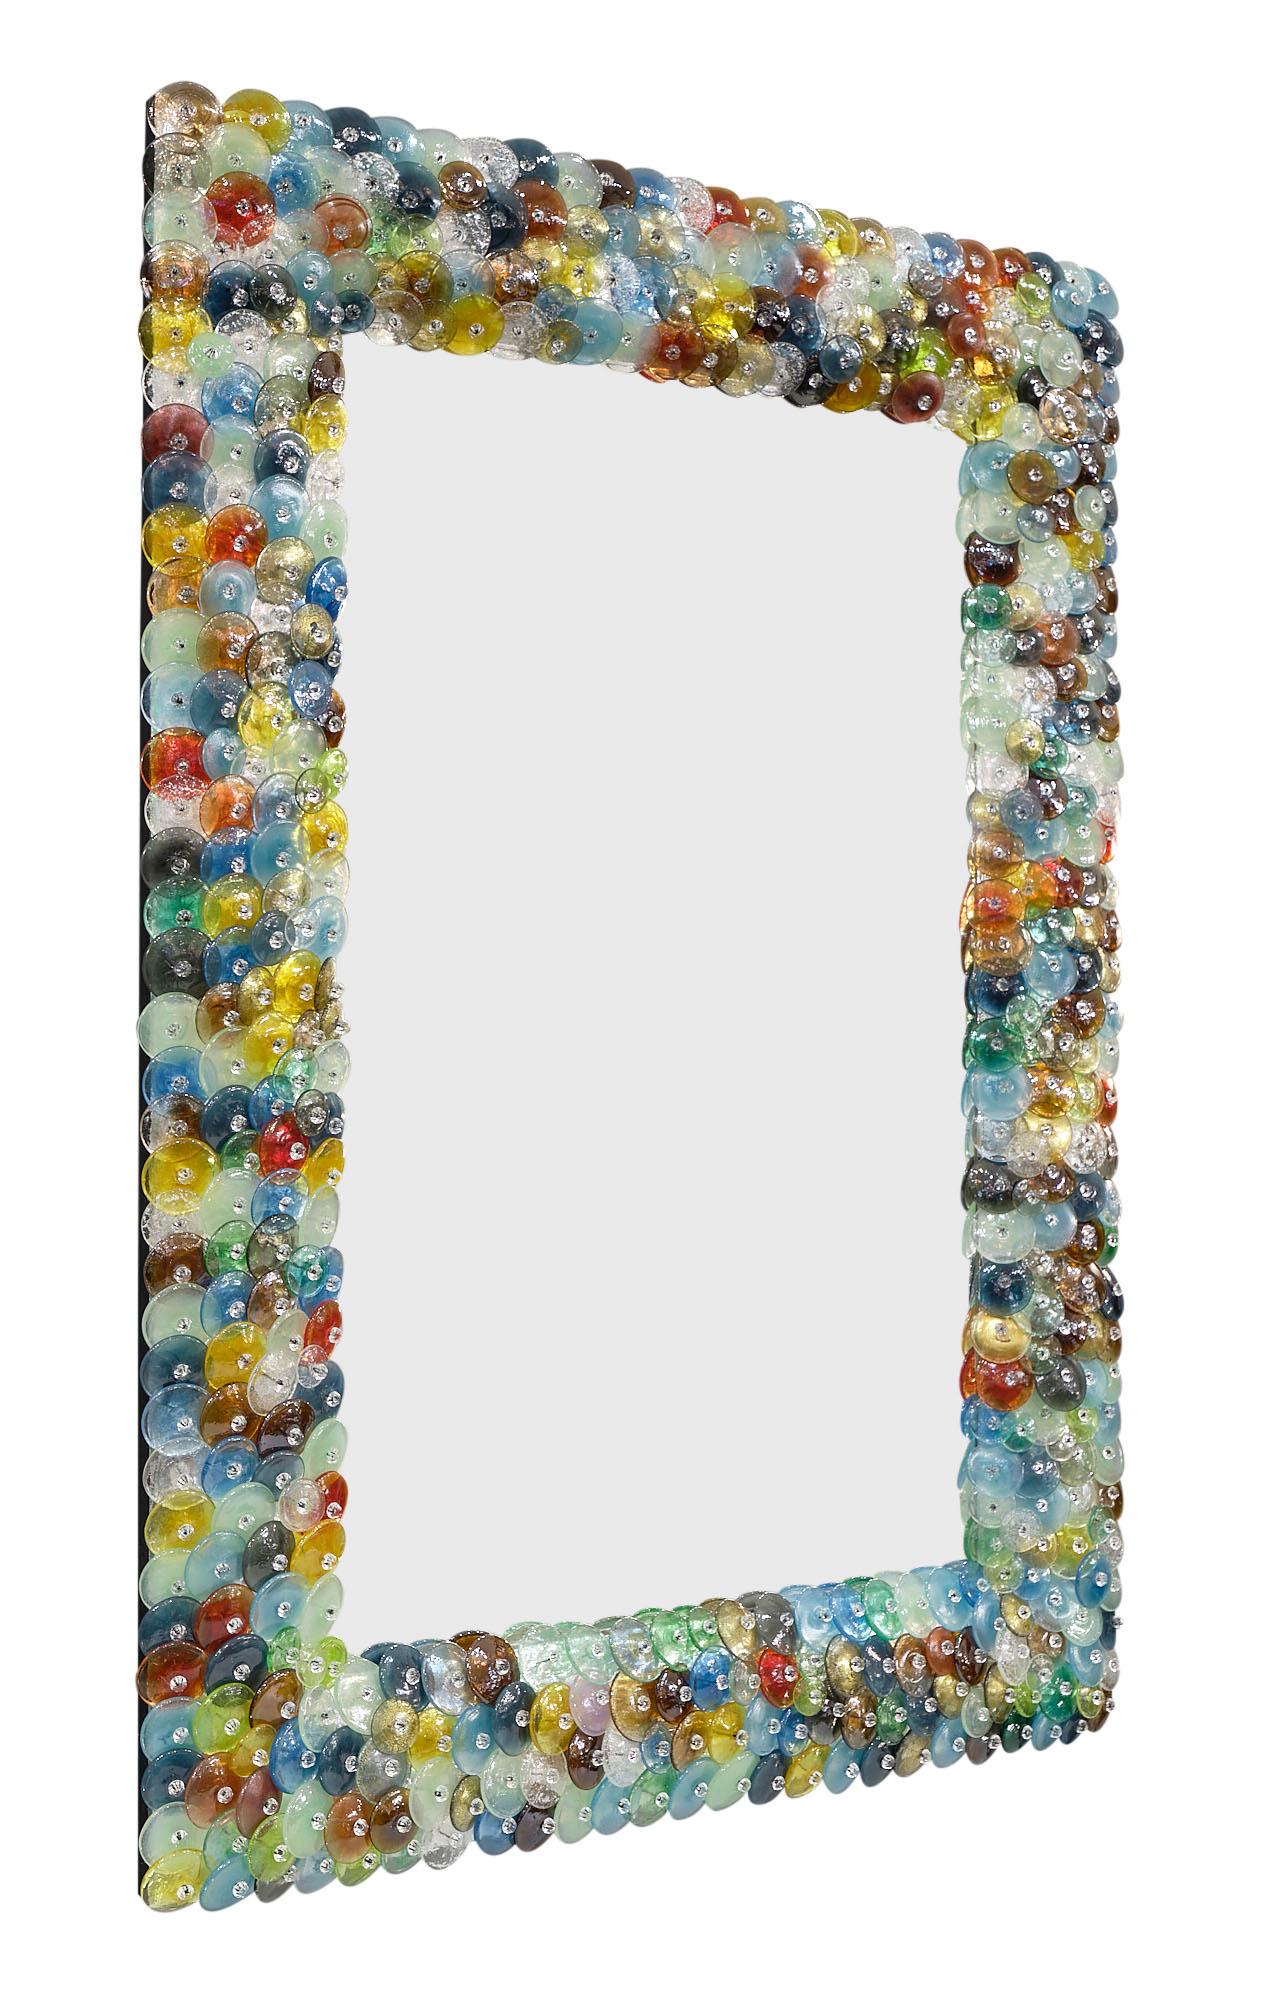 Murano glass “coriandoli” mirror made of hand-blown glass pieces or “pastille” in a variety of colors. The name “coriandoli” means confetti. We love the beautiful detail of this piece.